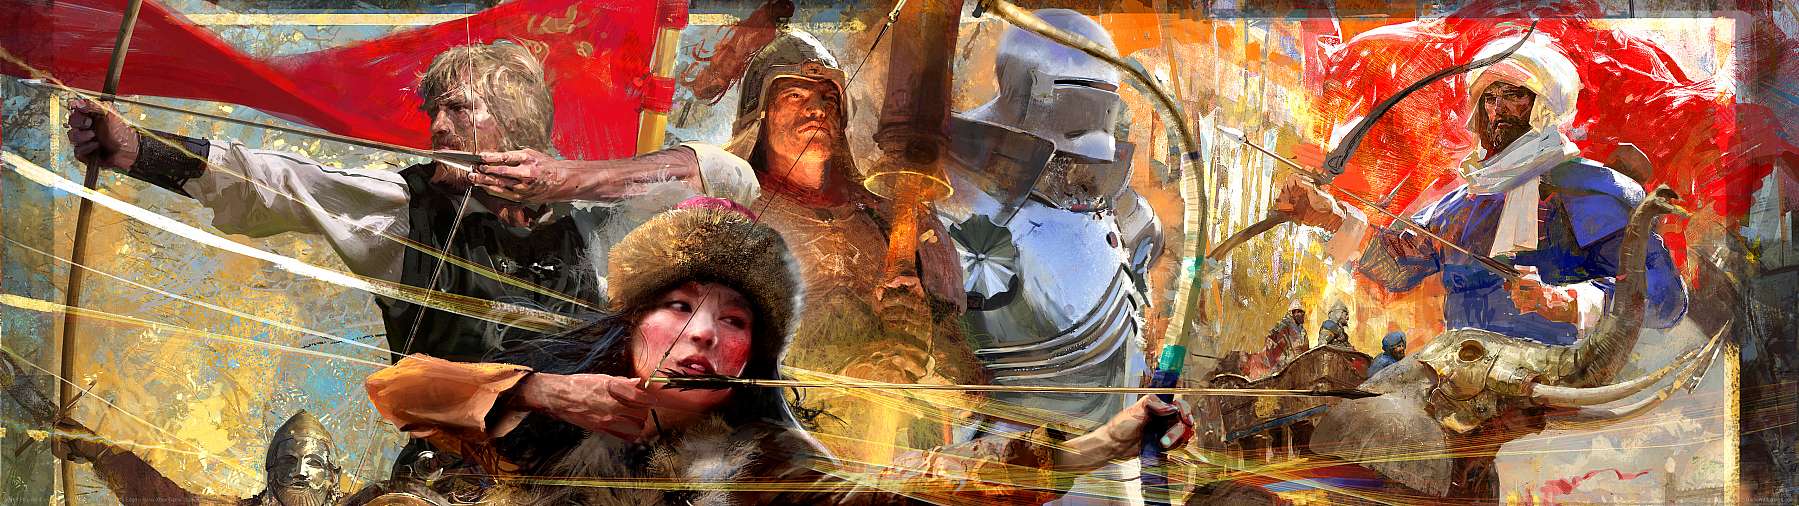 Age of Empires 4 wallpaper or background